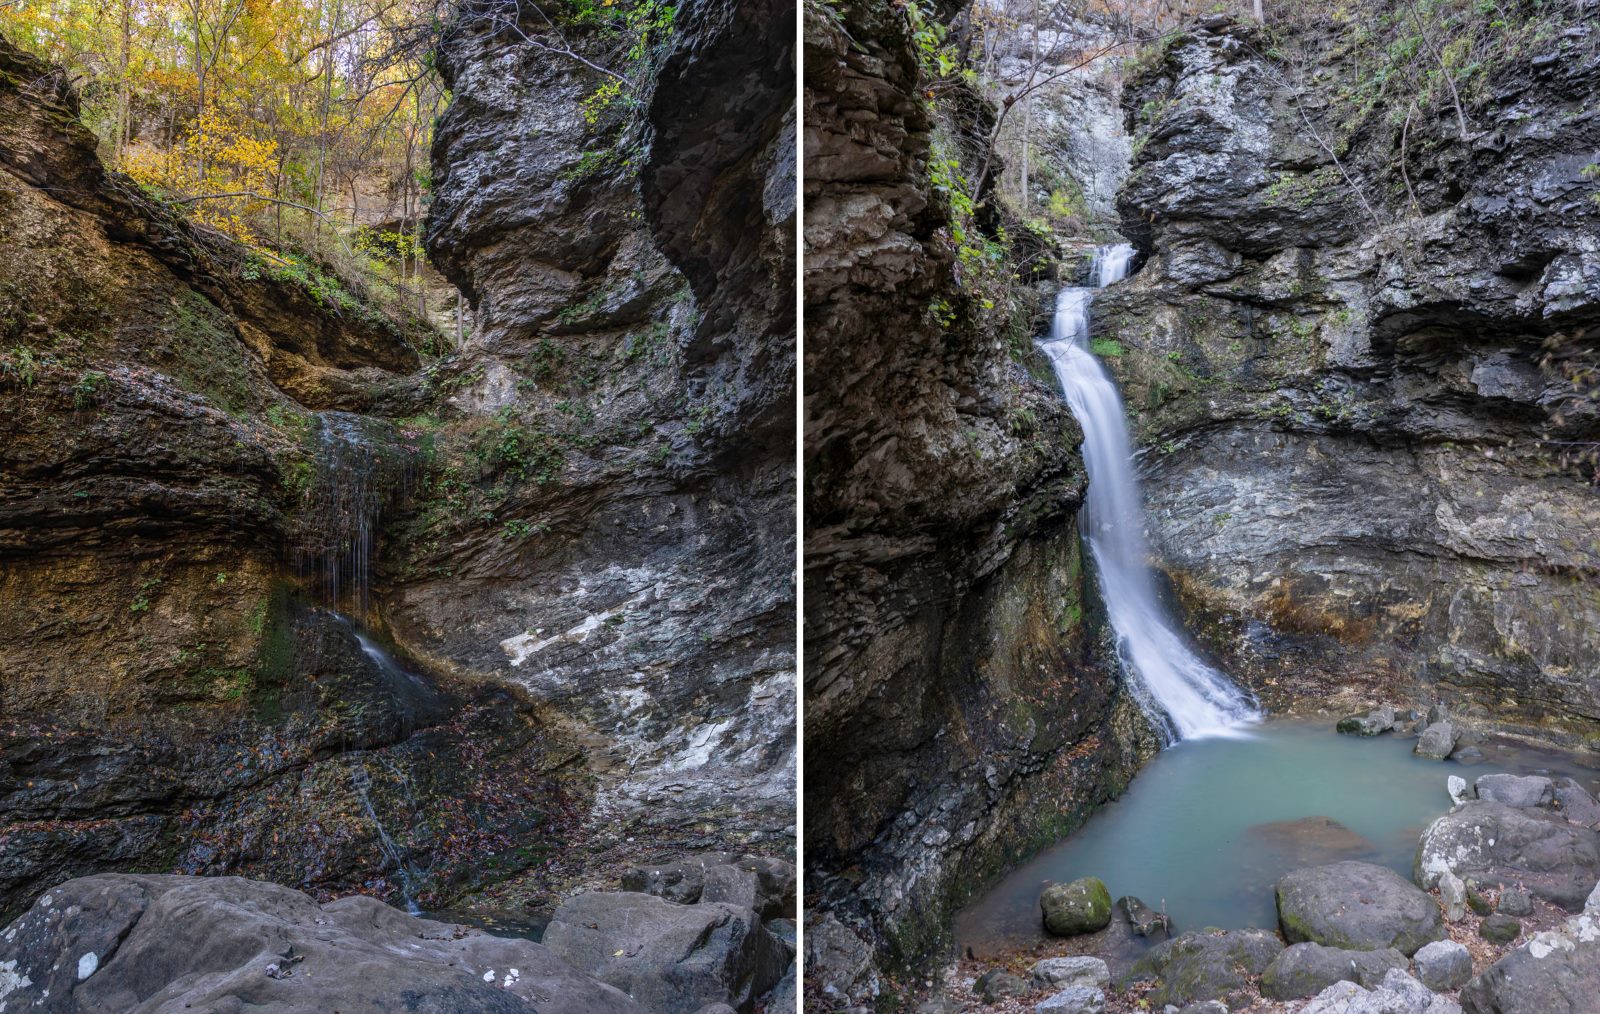 Side-by-side photos of Eden Falls, when it's dry on the left and when its flowing on the right